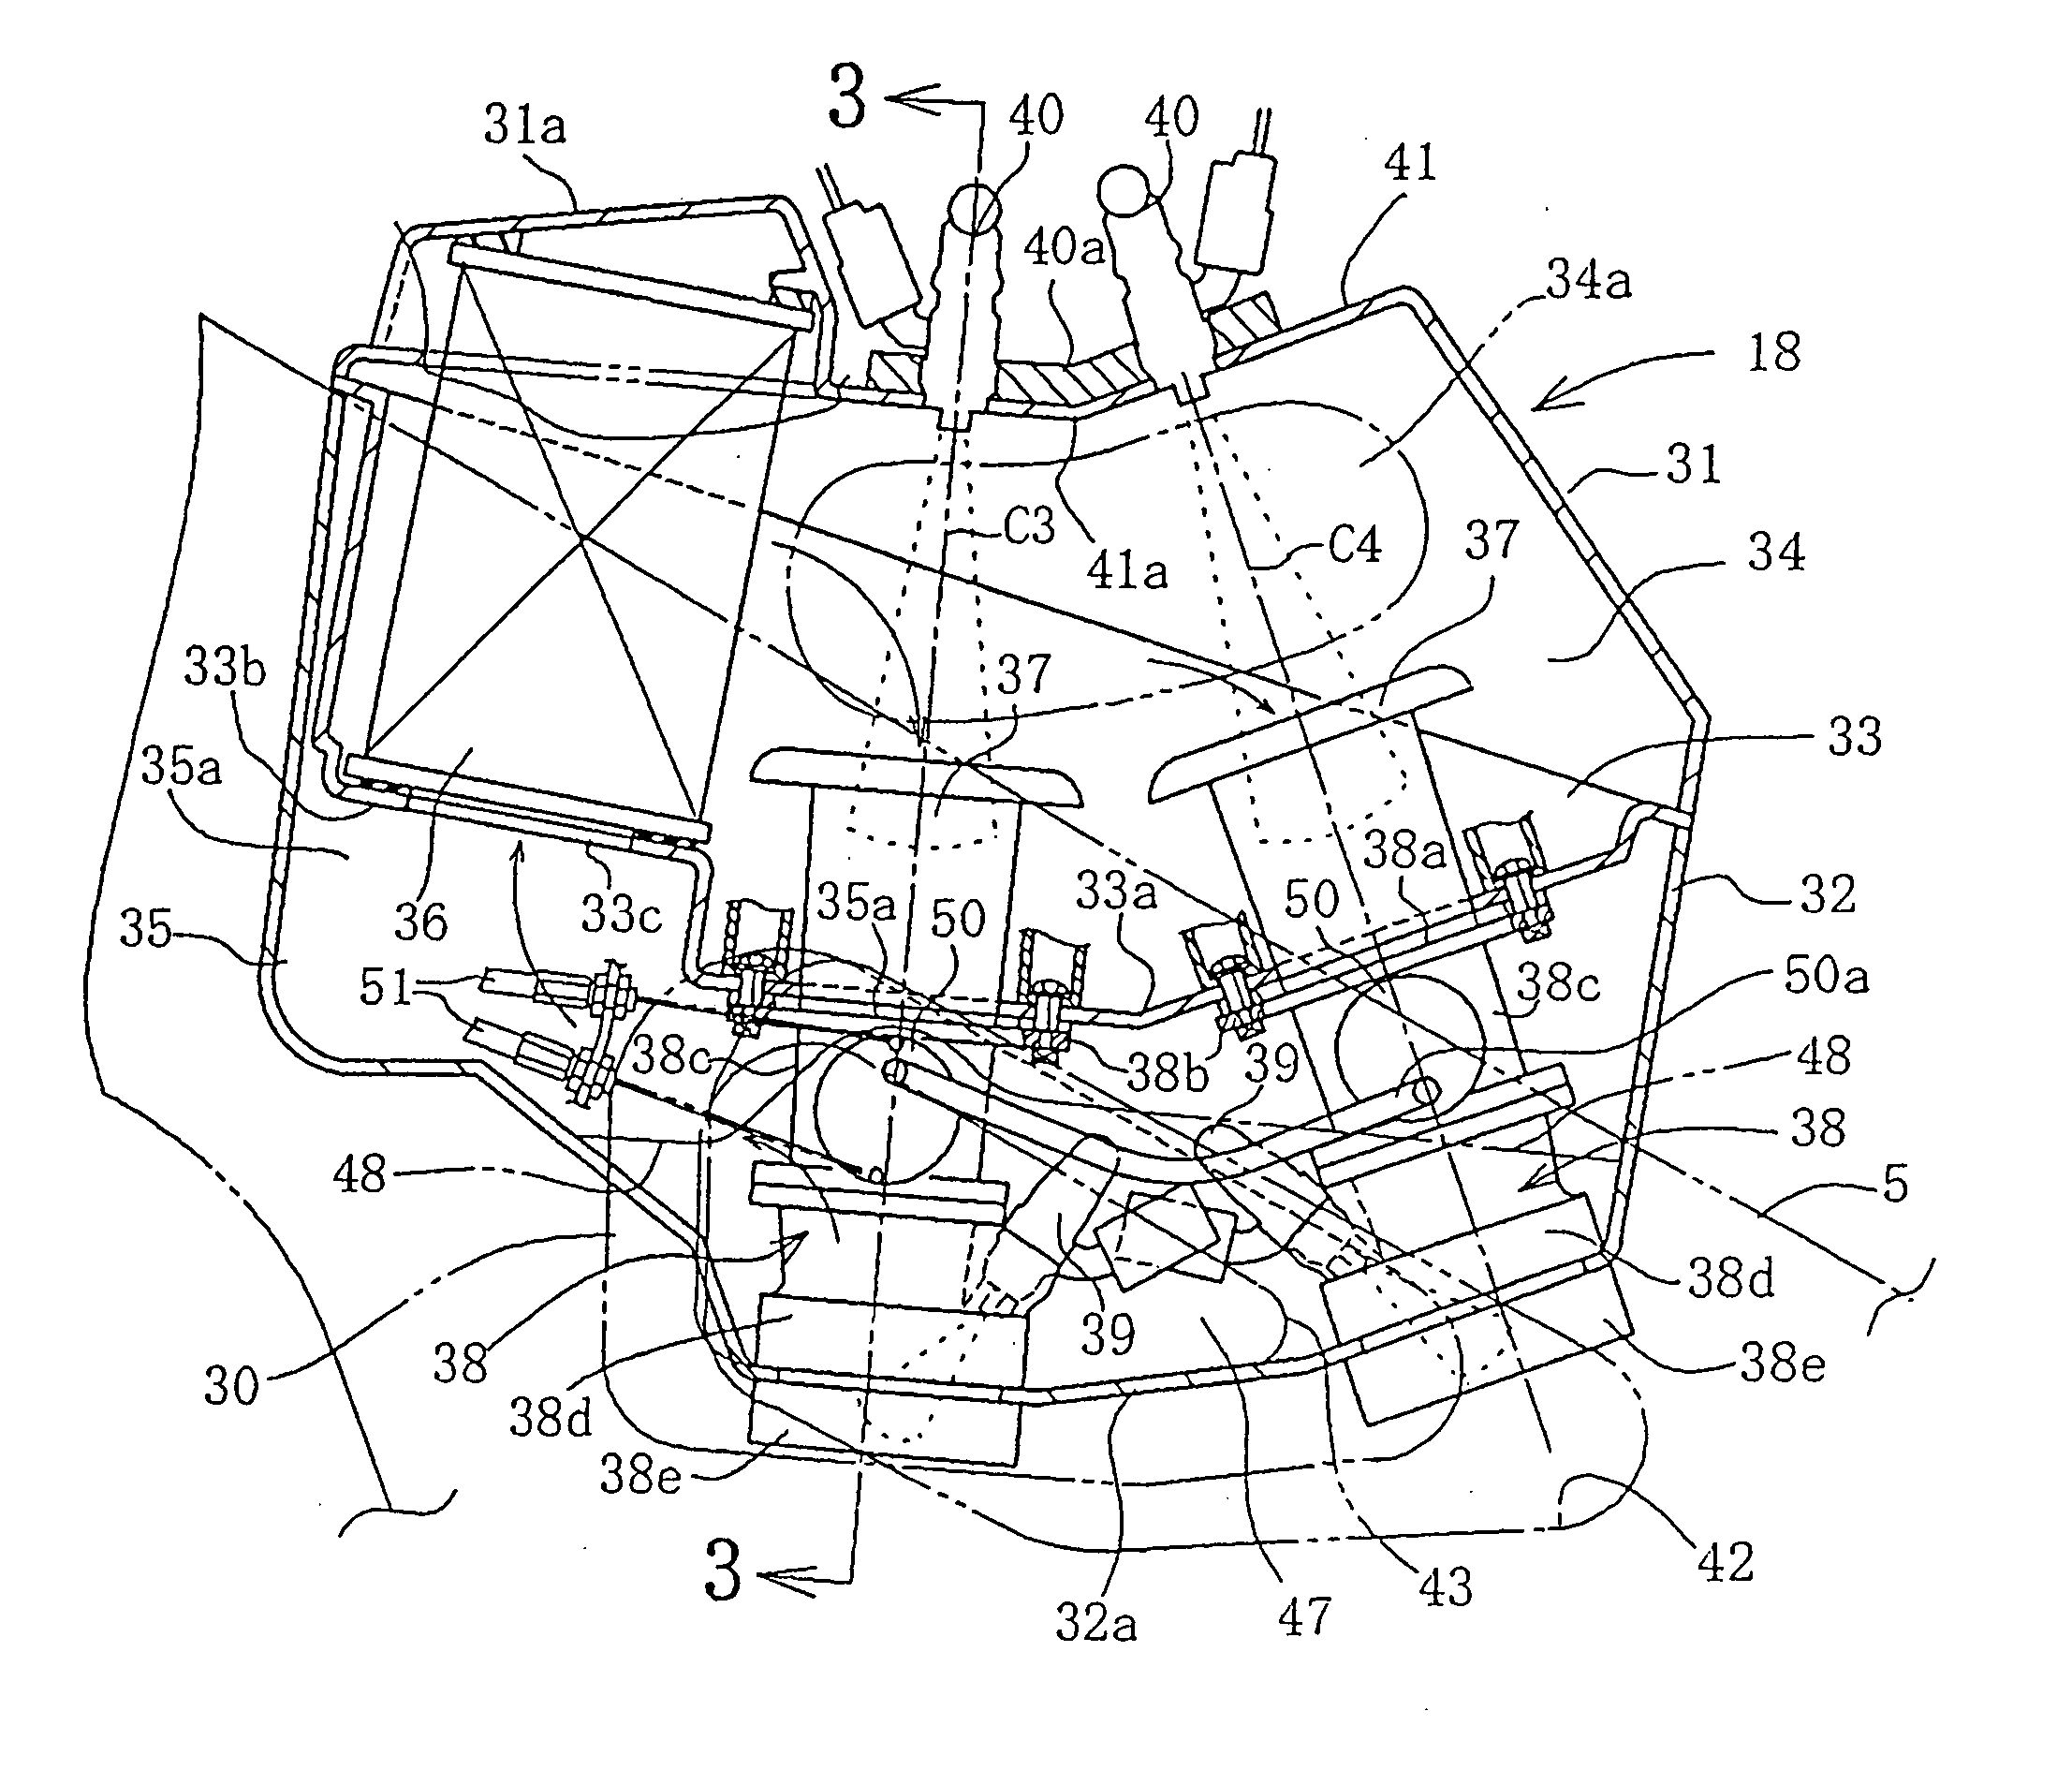 Intake air management apparatus for a vehicle, and motorcycle including same